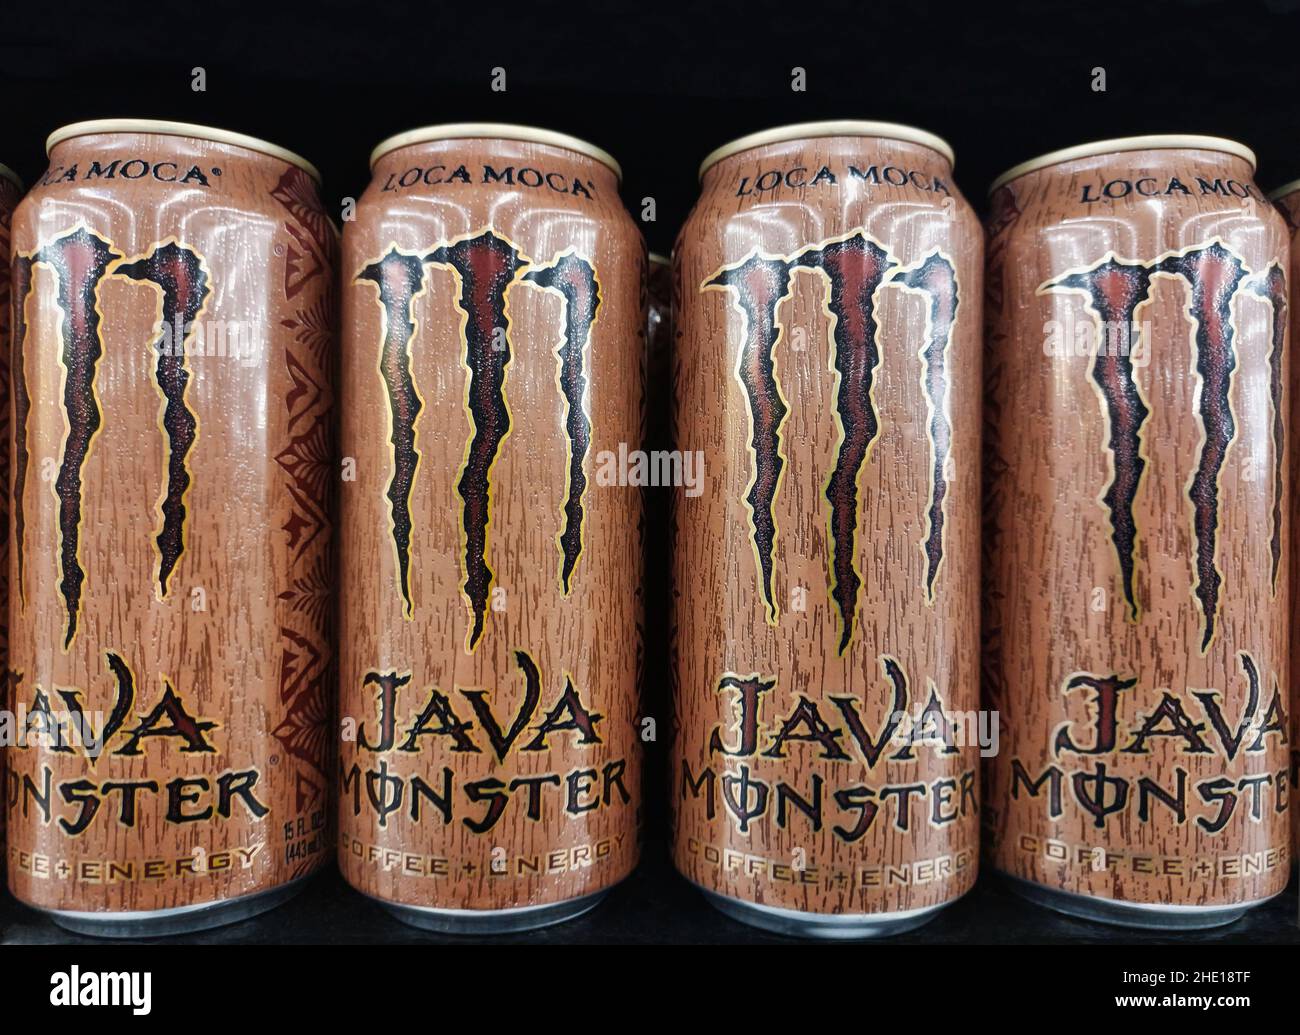 Houston, Texas USA 01-06-2022: Java Monster energy drink cans lined up on a supermarket shelf with a black background. Stock Photo